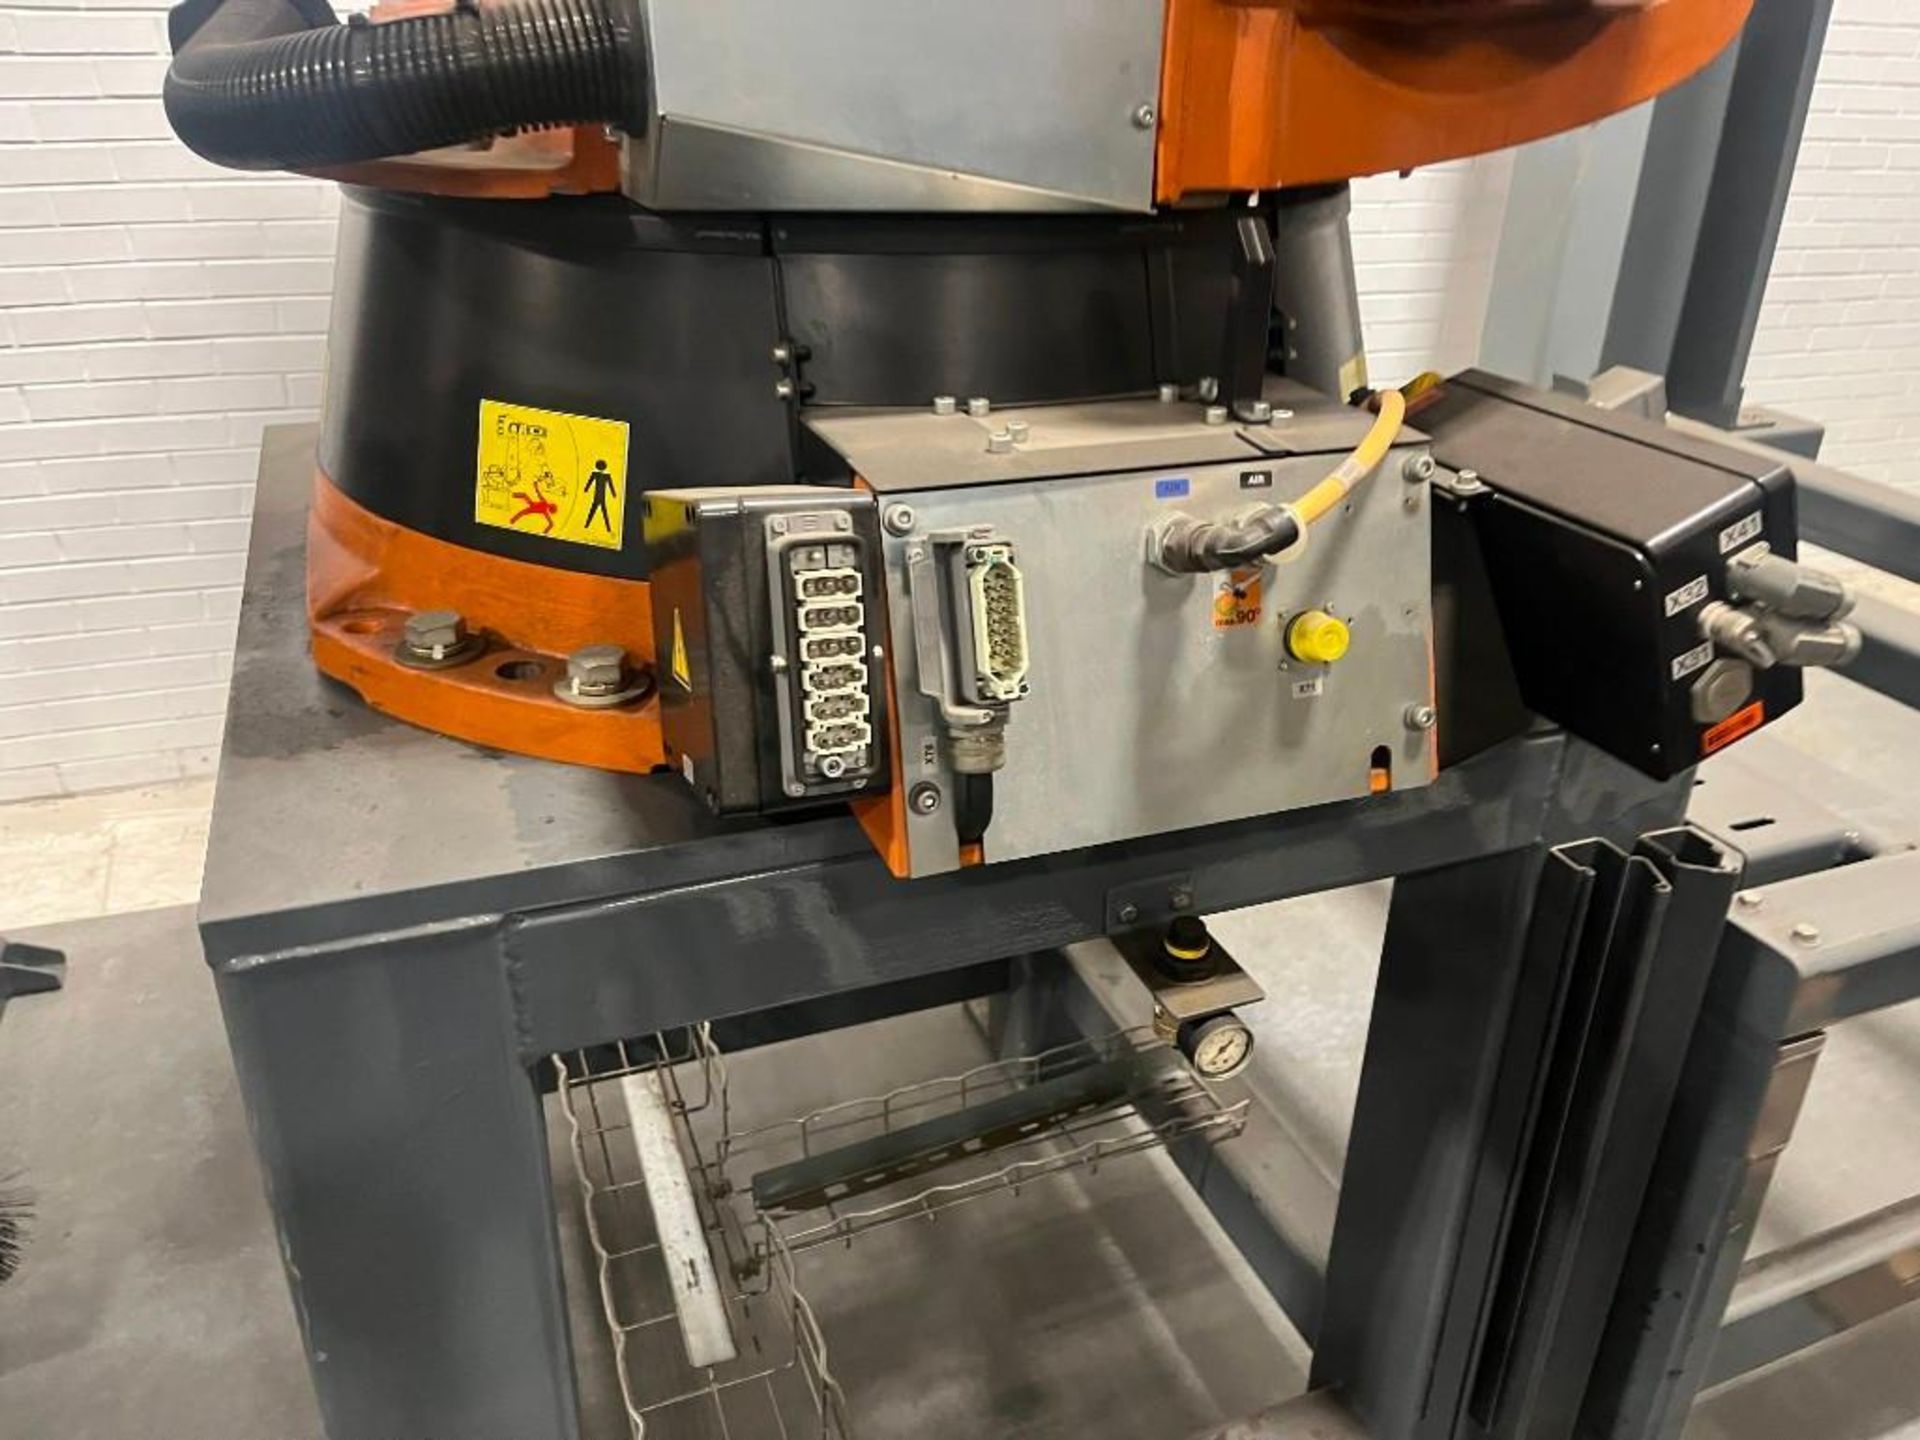 Wulftec/Kuka Robotic Palletizing System, Model ECOPAL. Includes (1) Wulftec automatic stretch wrappe - Image 41 of 75